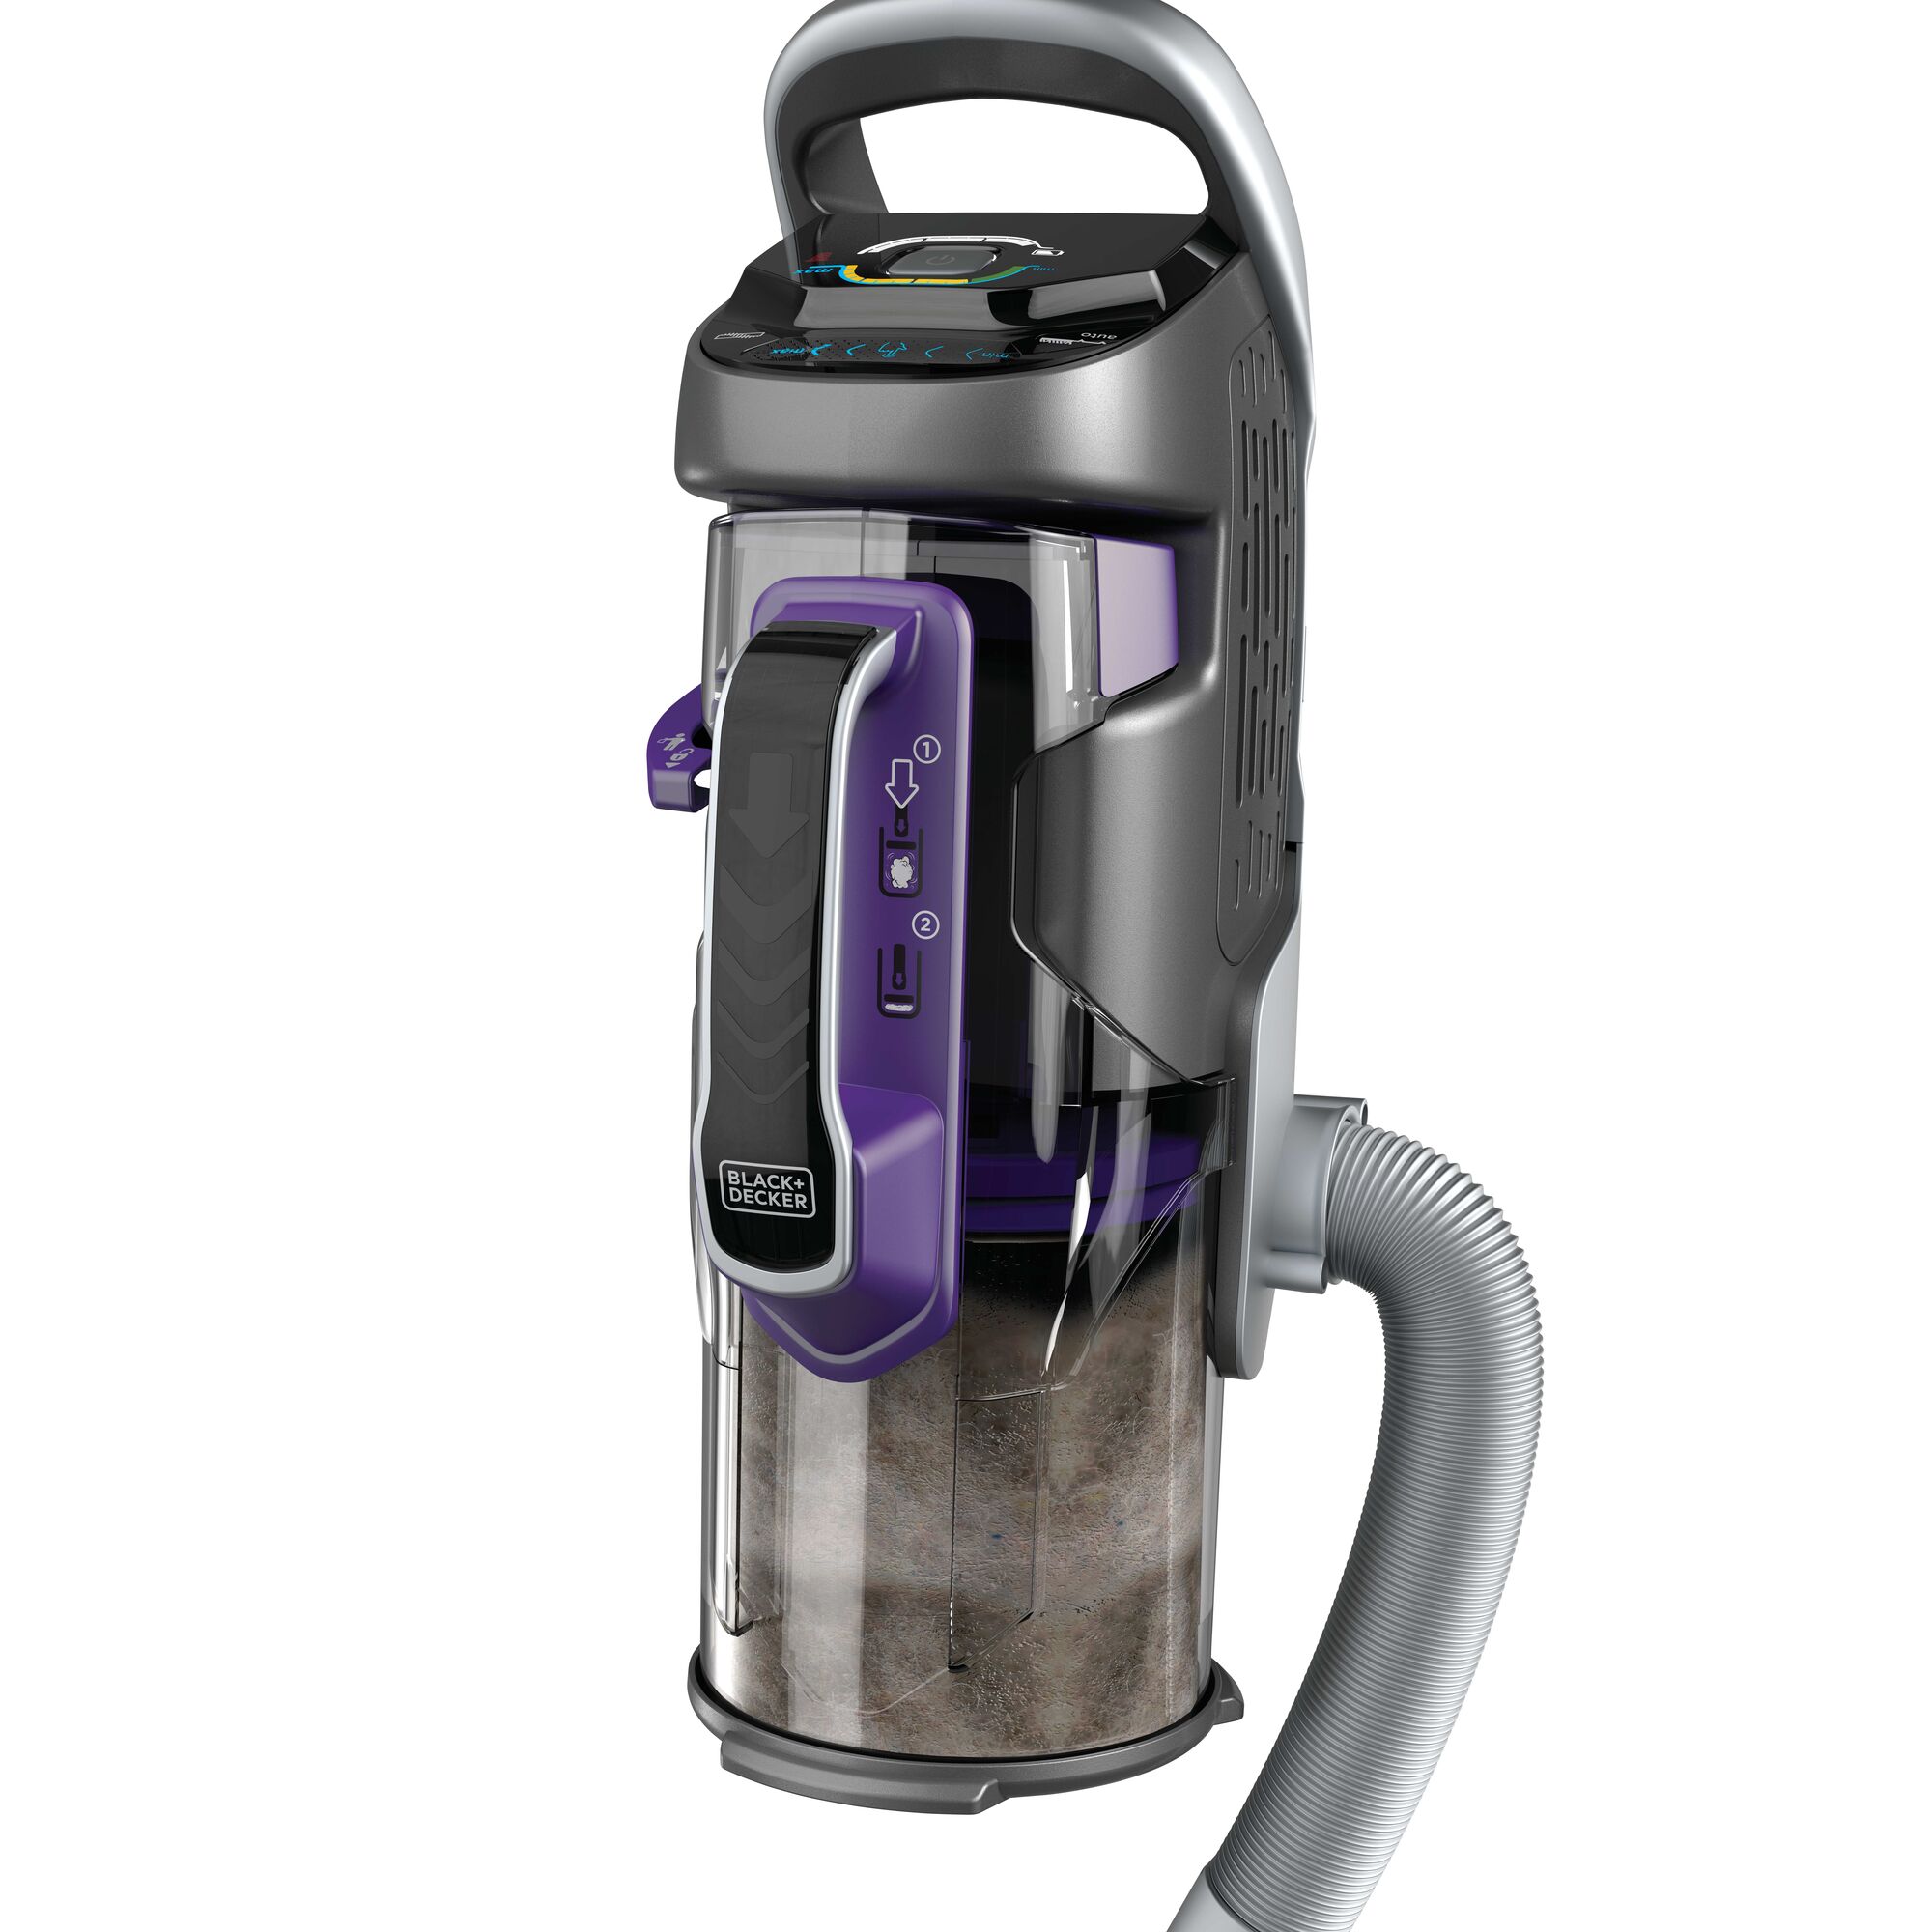 Dust compactor feature of POWER SERIES PRO cordless 2 in 1 pet vacuum.